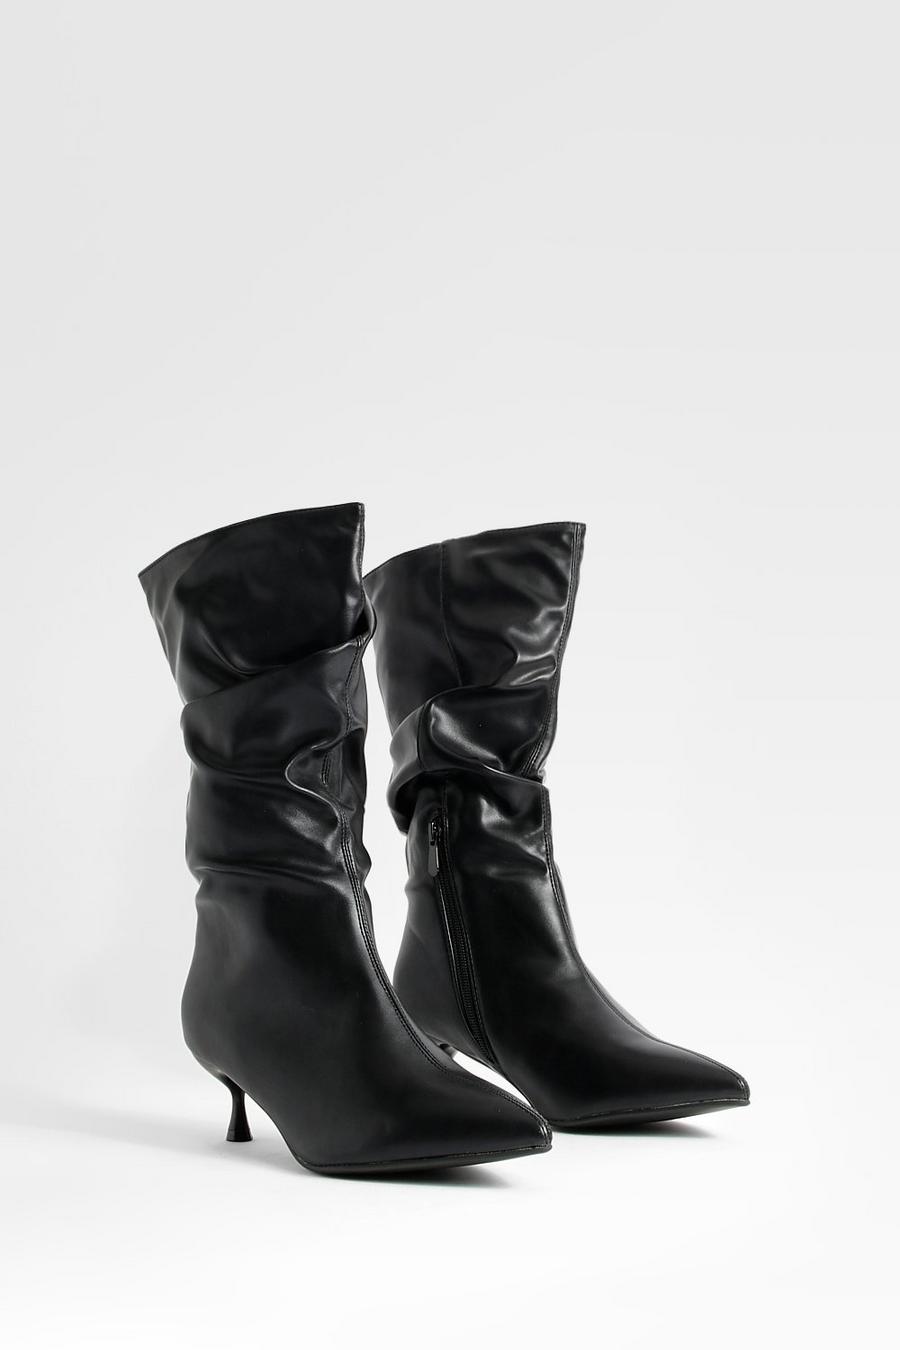 Black Wide Width Ruched Low Heel Knee High Boots